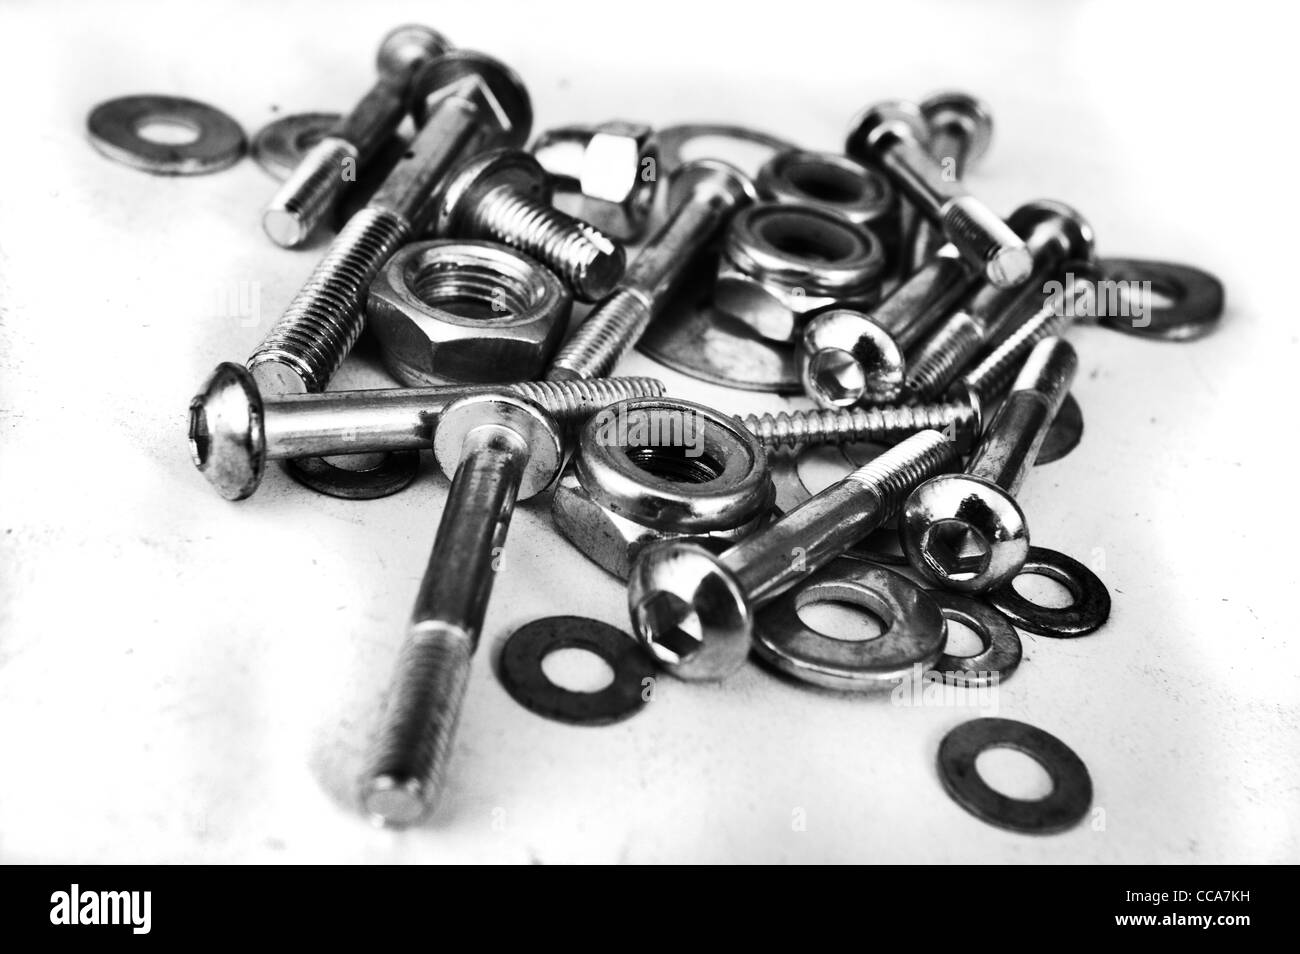 nuts and bolts in a white backgorund. Stock Photo